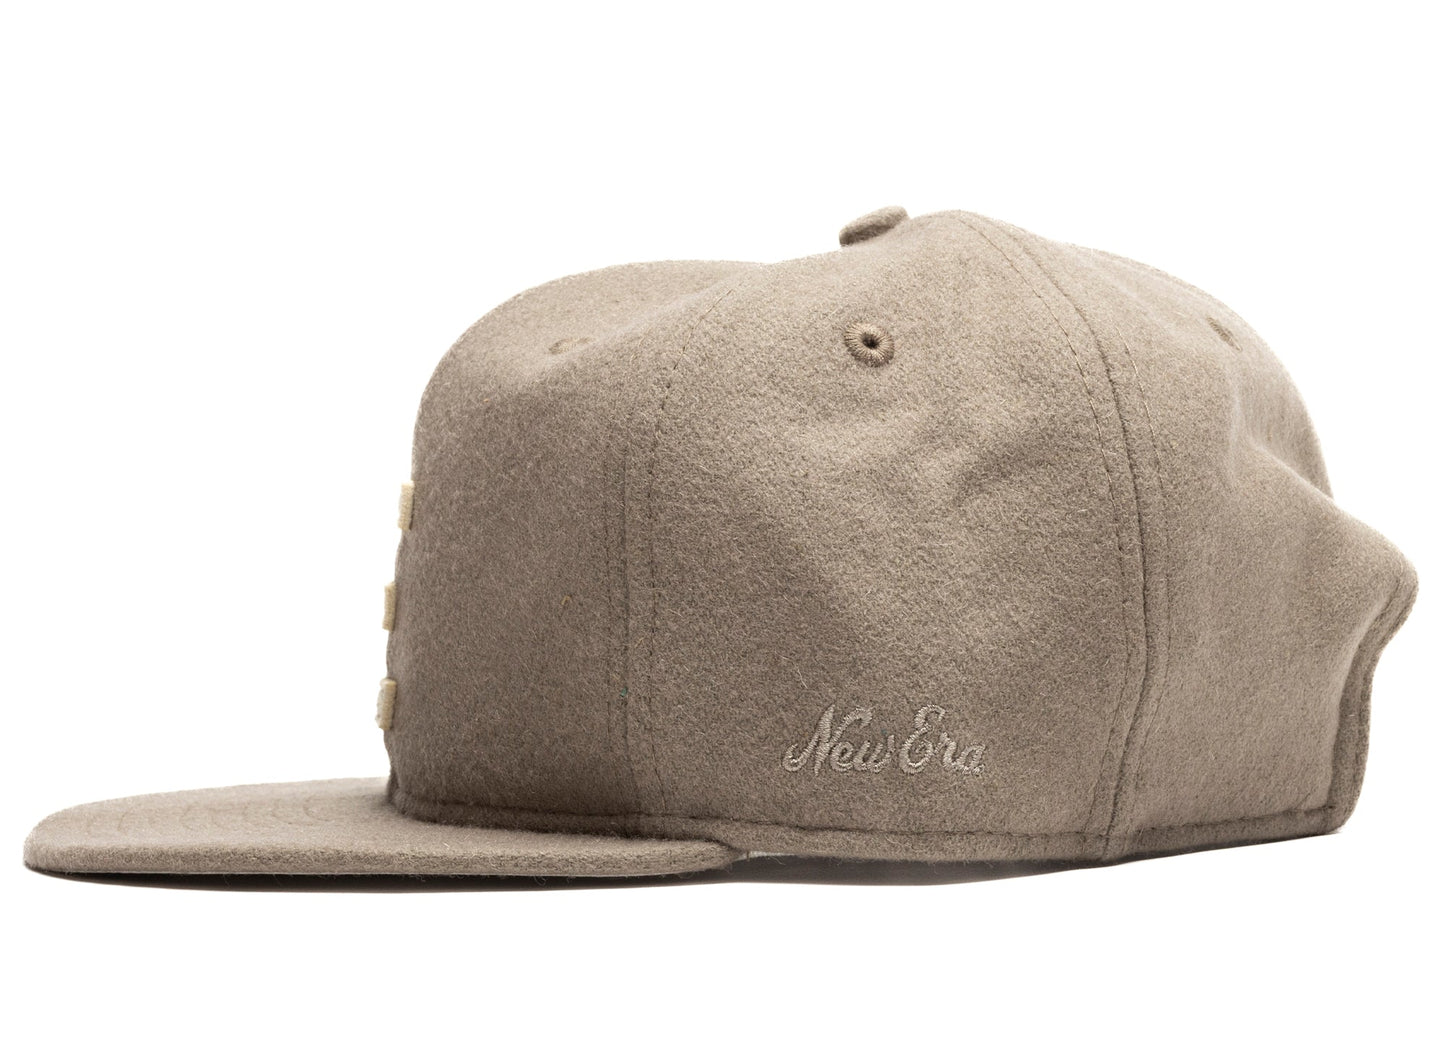 Fear of God Holiday Essentials Hat in Tan